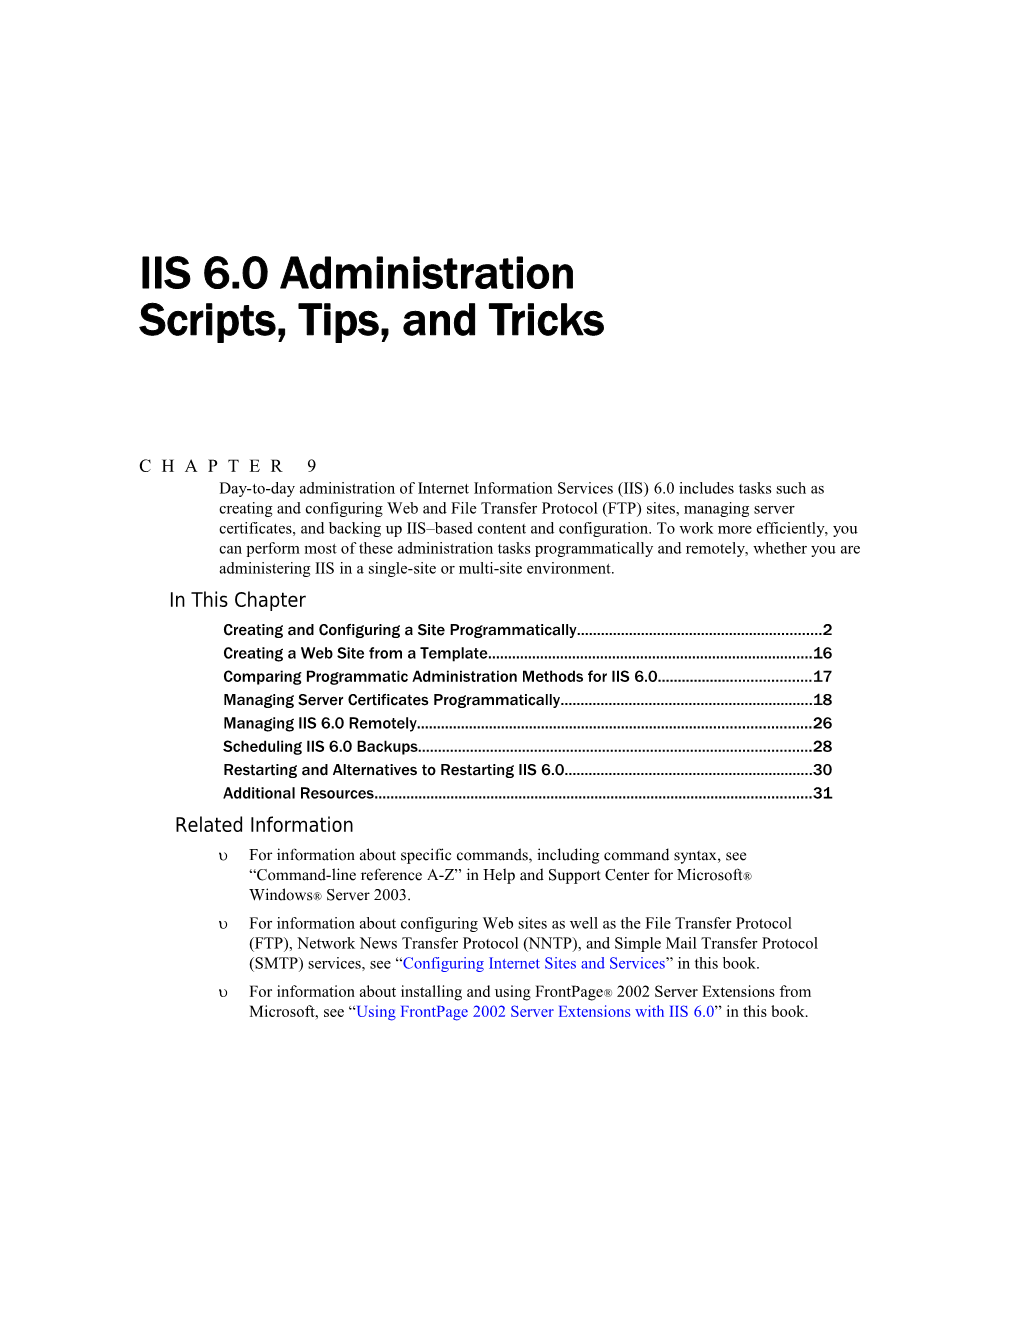 IIS6.0 Administration Scripts, Tips, and Tricks